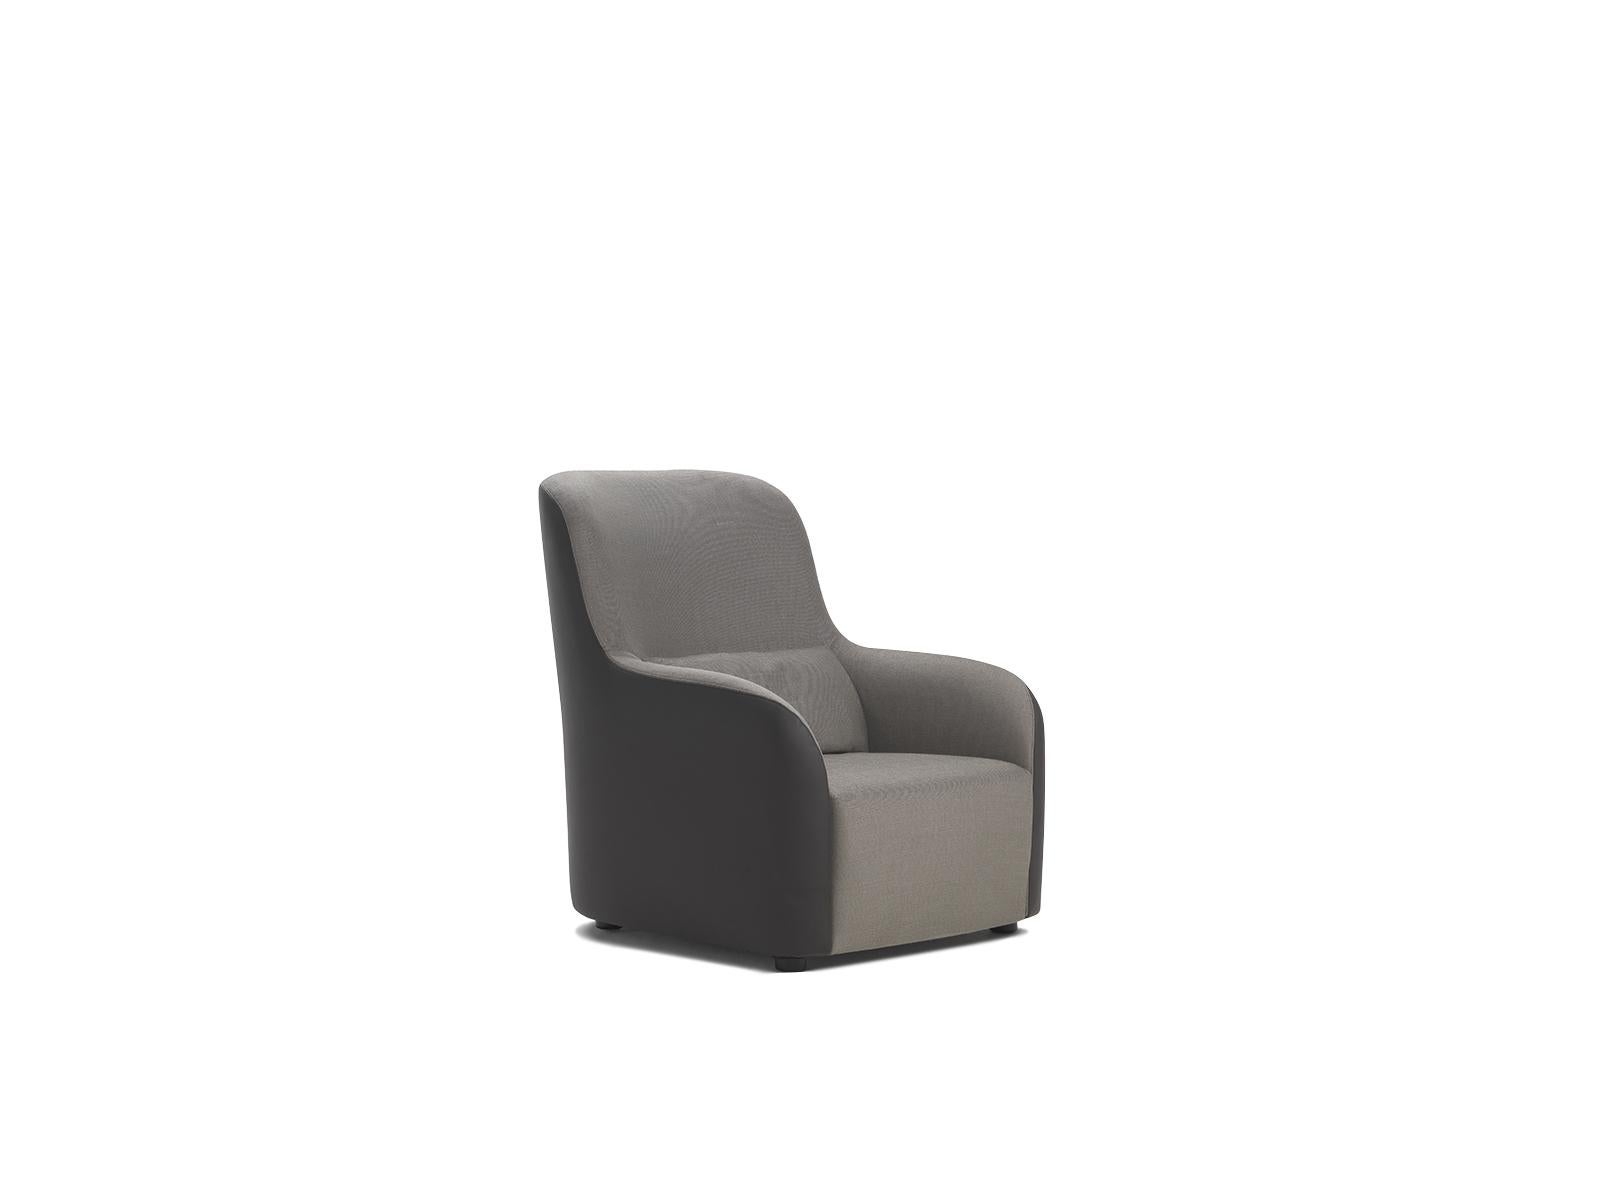 A simple and sophisticated design, an upholstered seating set suitable for living rooms and large bedrooms. Contrast finishing of leather and fabric brings unique elegance to the soft silhouette.